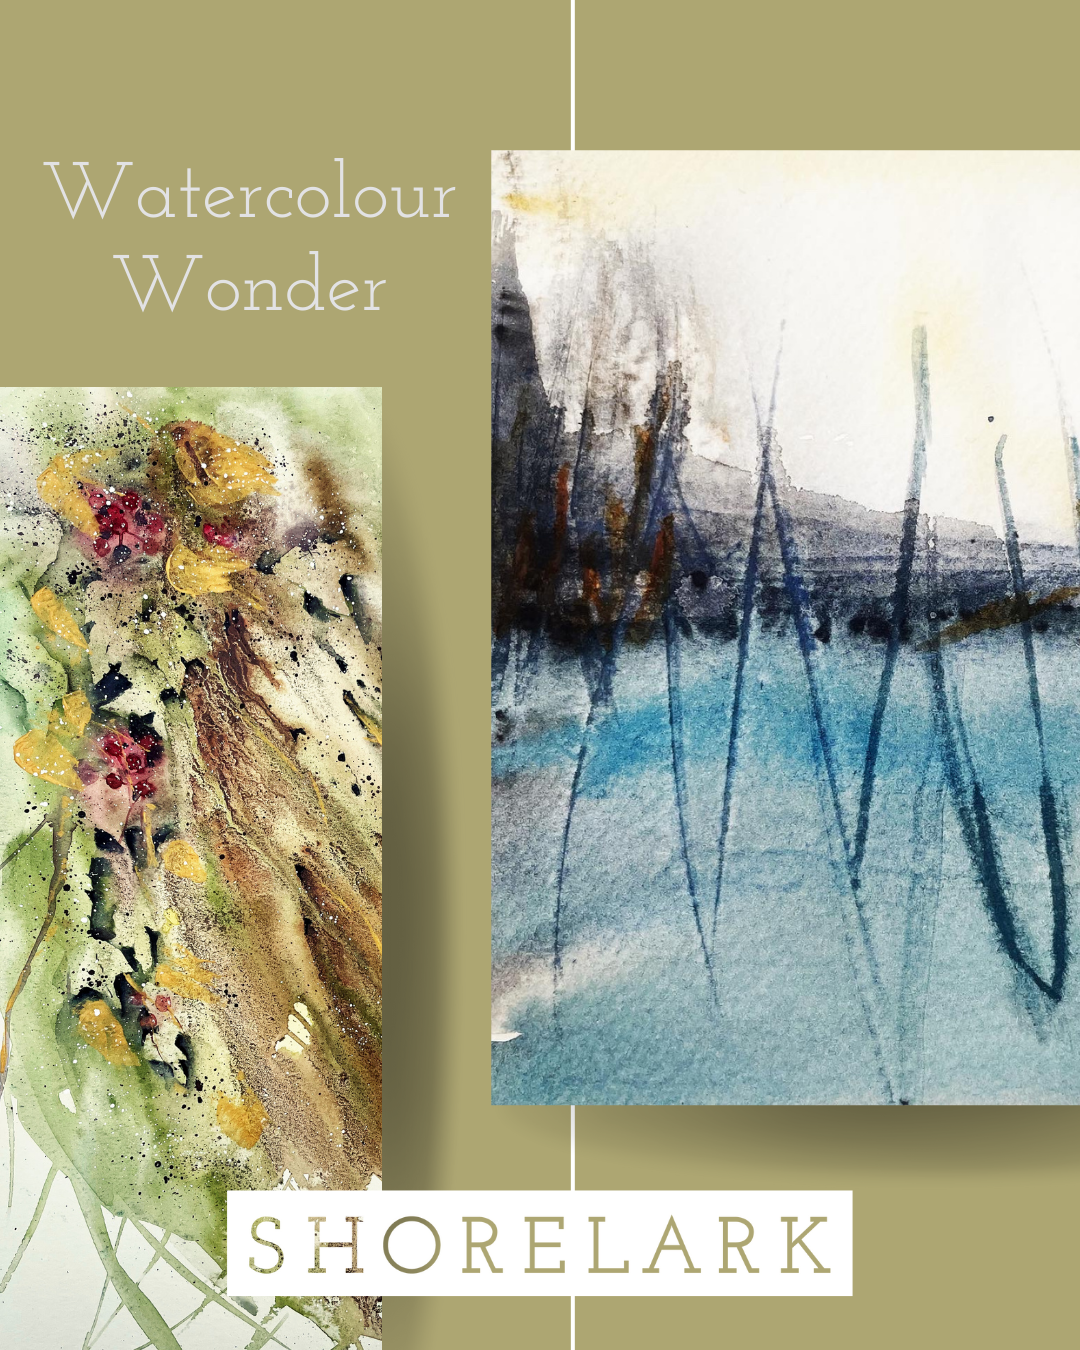 MAY (11th) - Watercolour Wonder - Immersion Day (Beginner Intro Session)